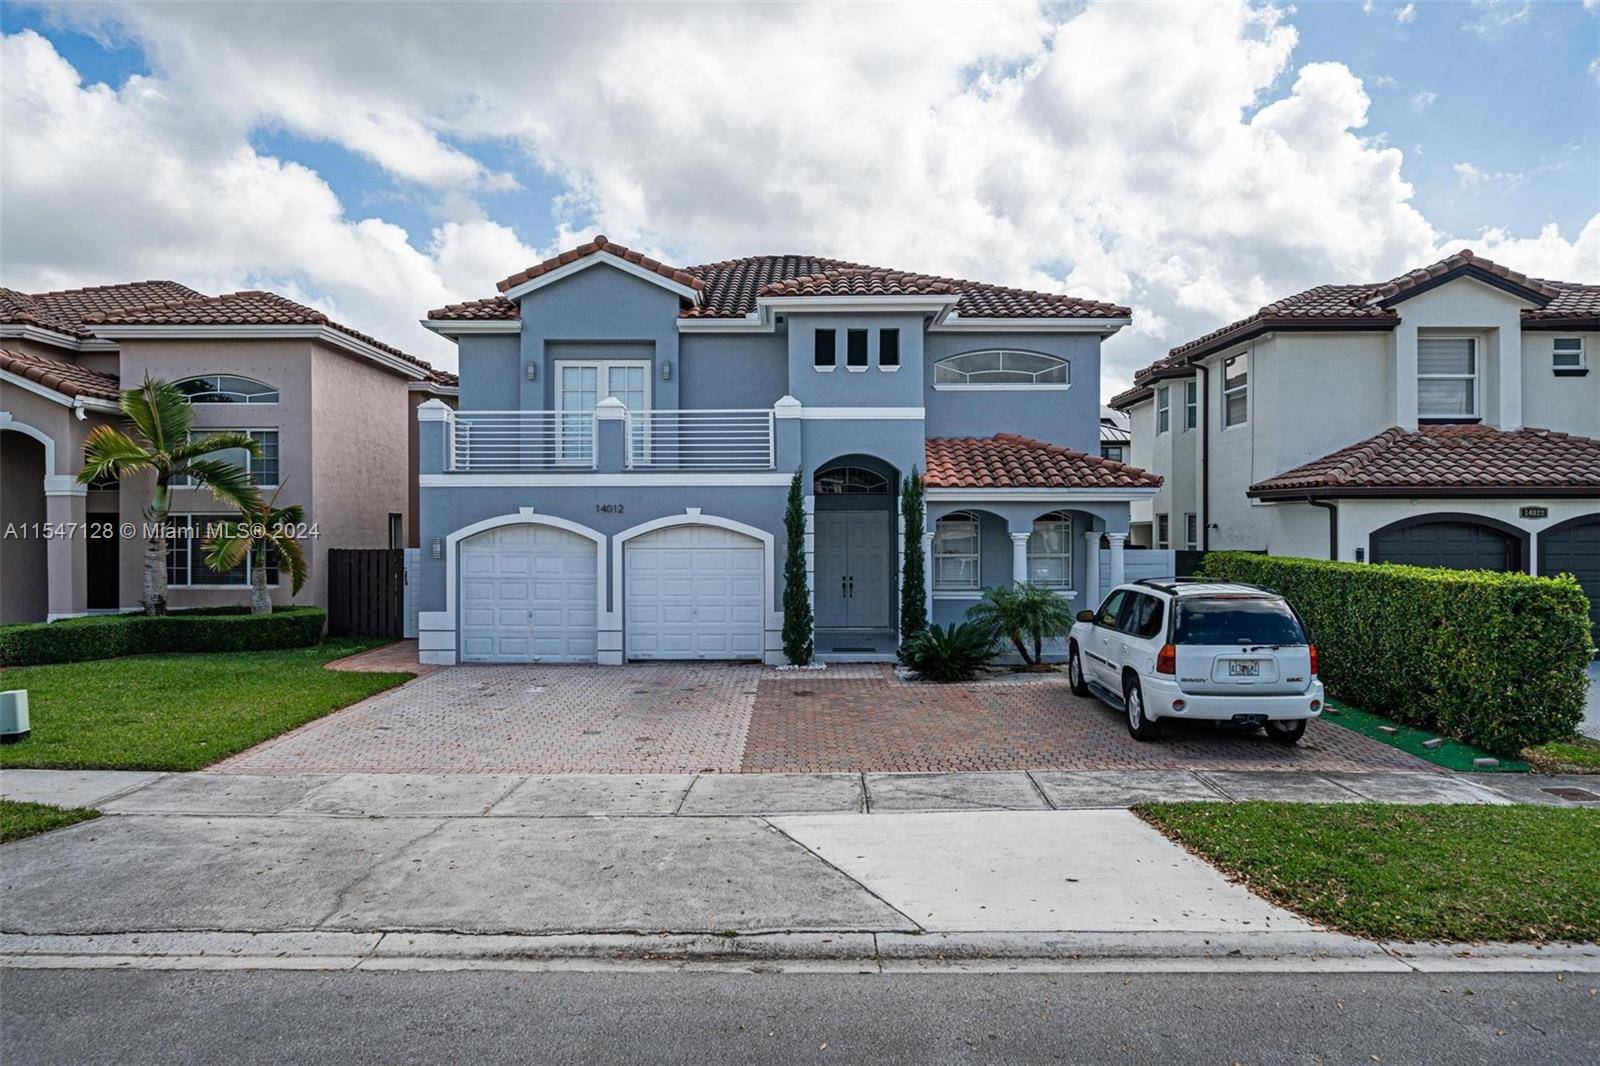 Beautiful, spacious, tastefully painted and decorated, 5 bedroom 3 bath home with over 2500SF L.